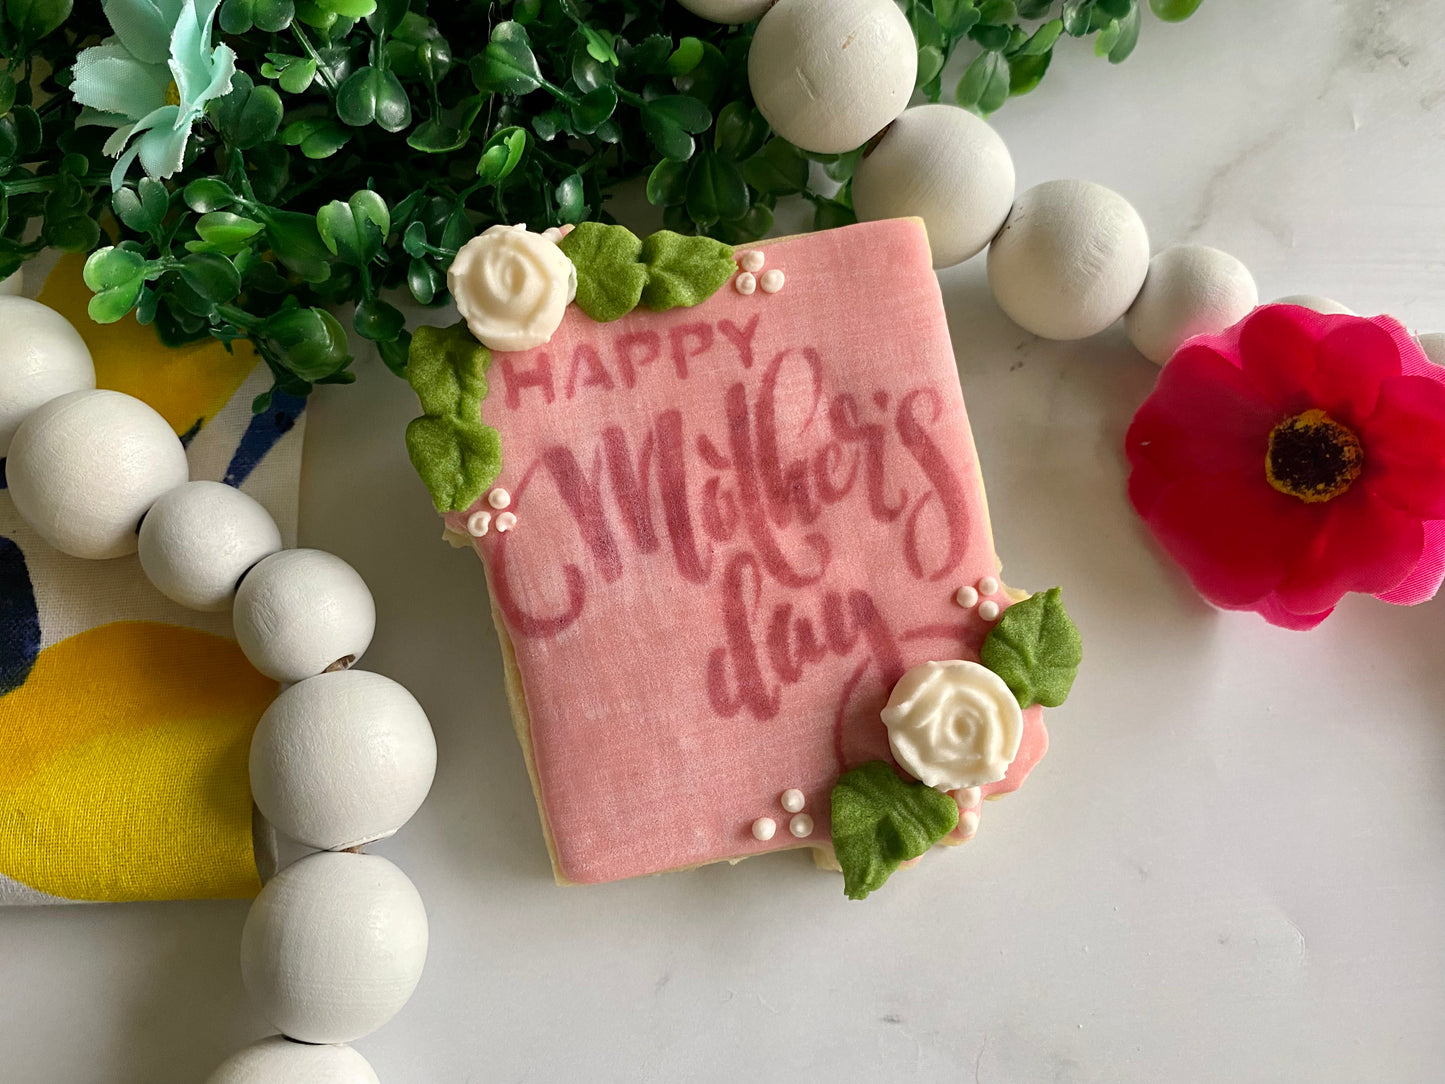 Mother's Day message cookie